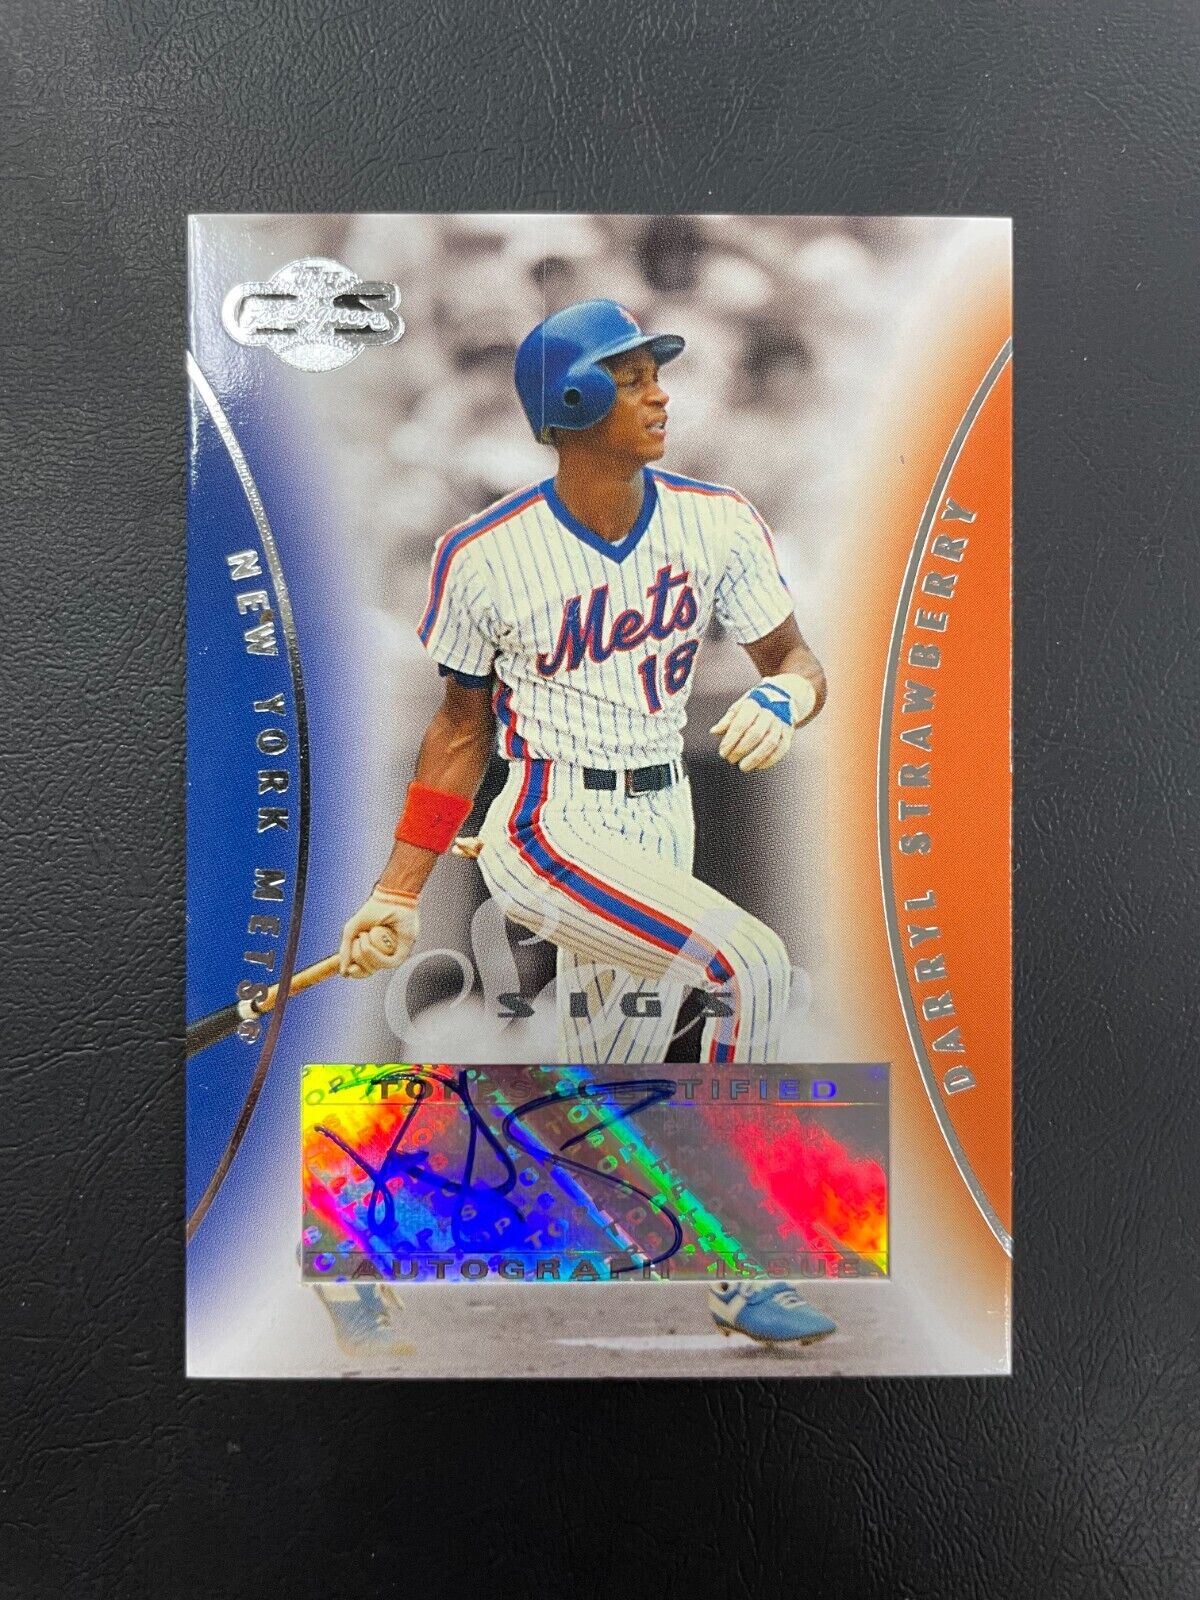 2006 Topps Co Signers Solo Sig Darryl Strawberry Auto New York Mets